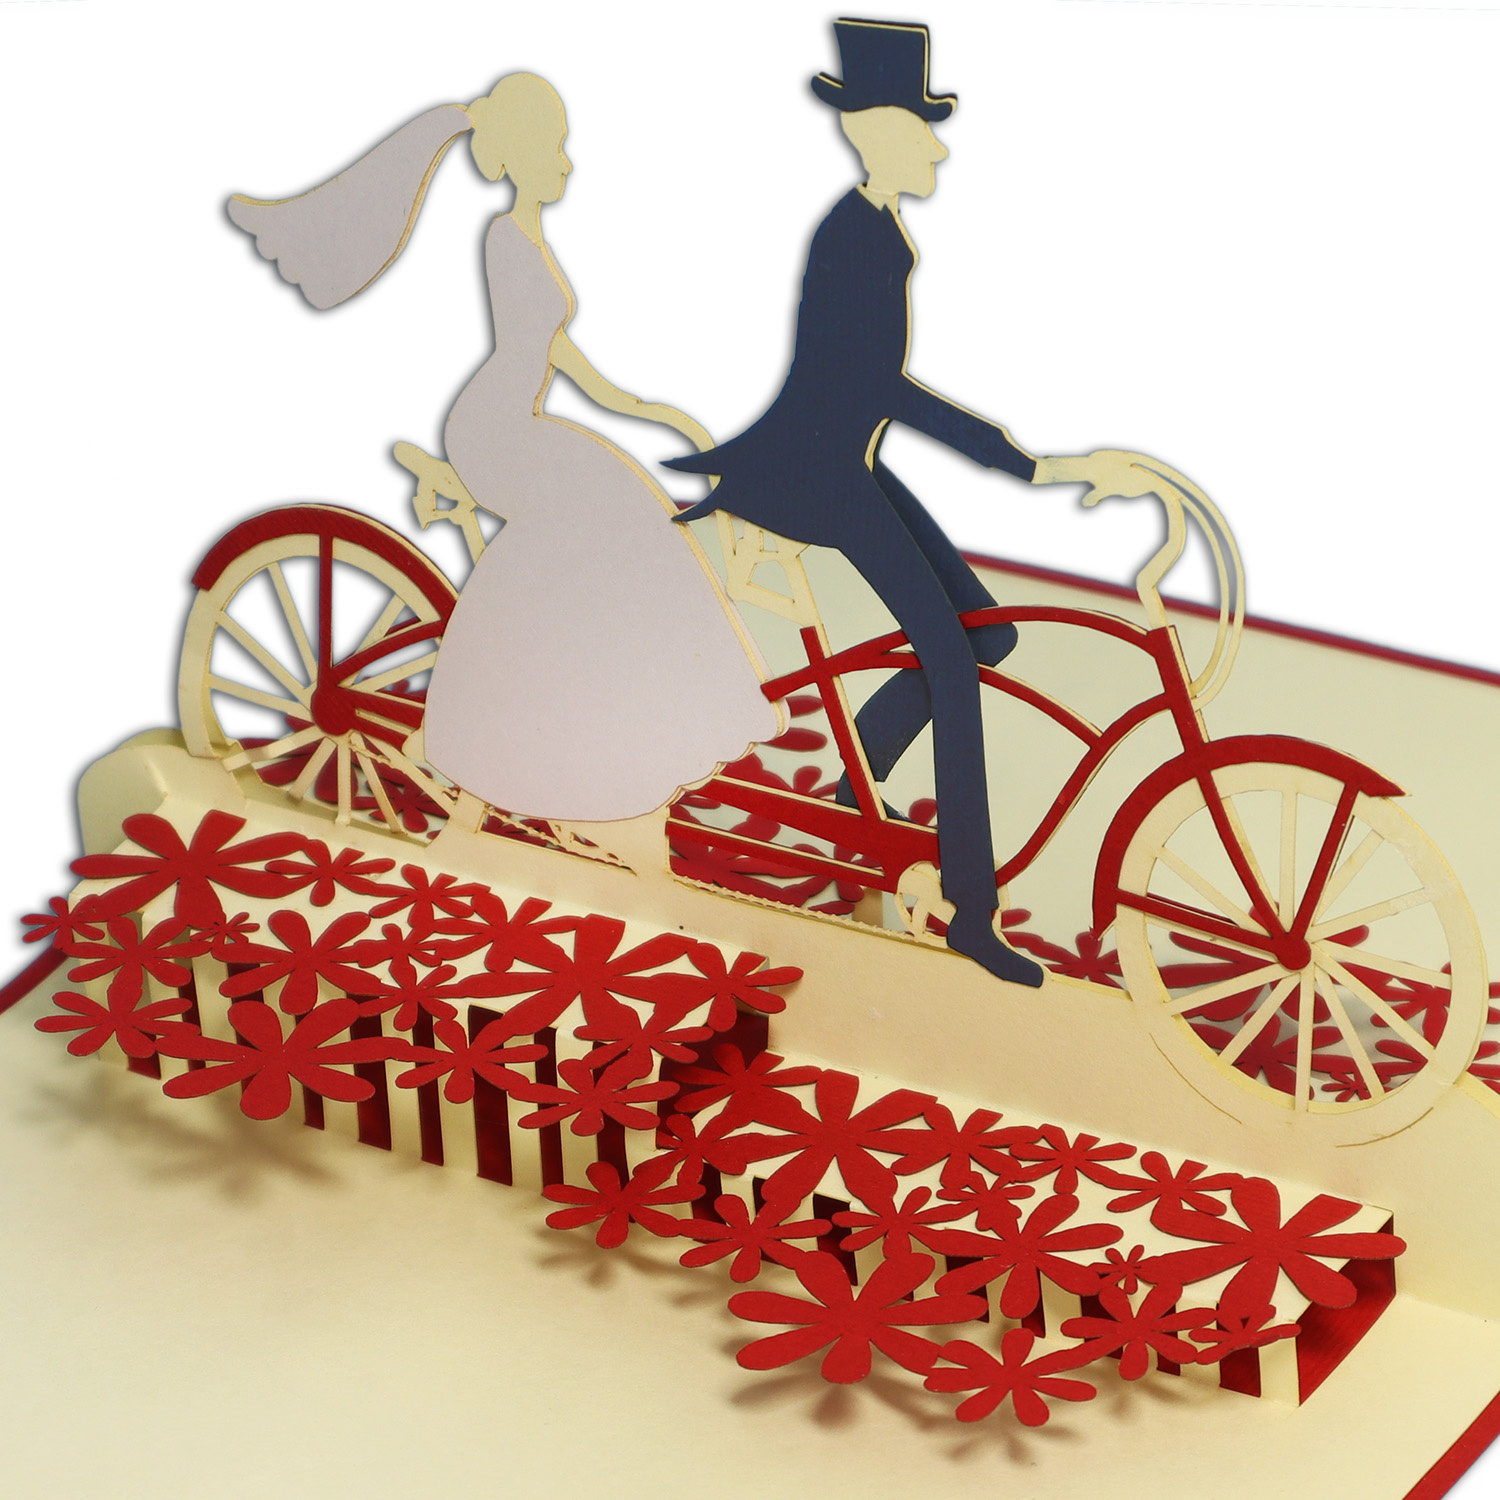 LINPOPUP Pop Up 3D Card, Wedding Cards, Wedding Invitation, Bridal Couple Bicycle, LINPopUp®, N88